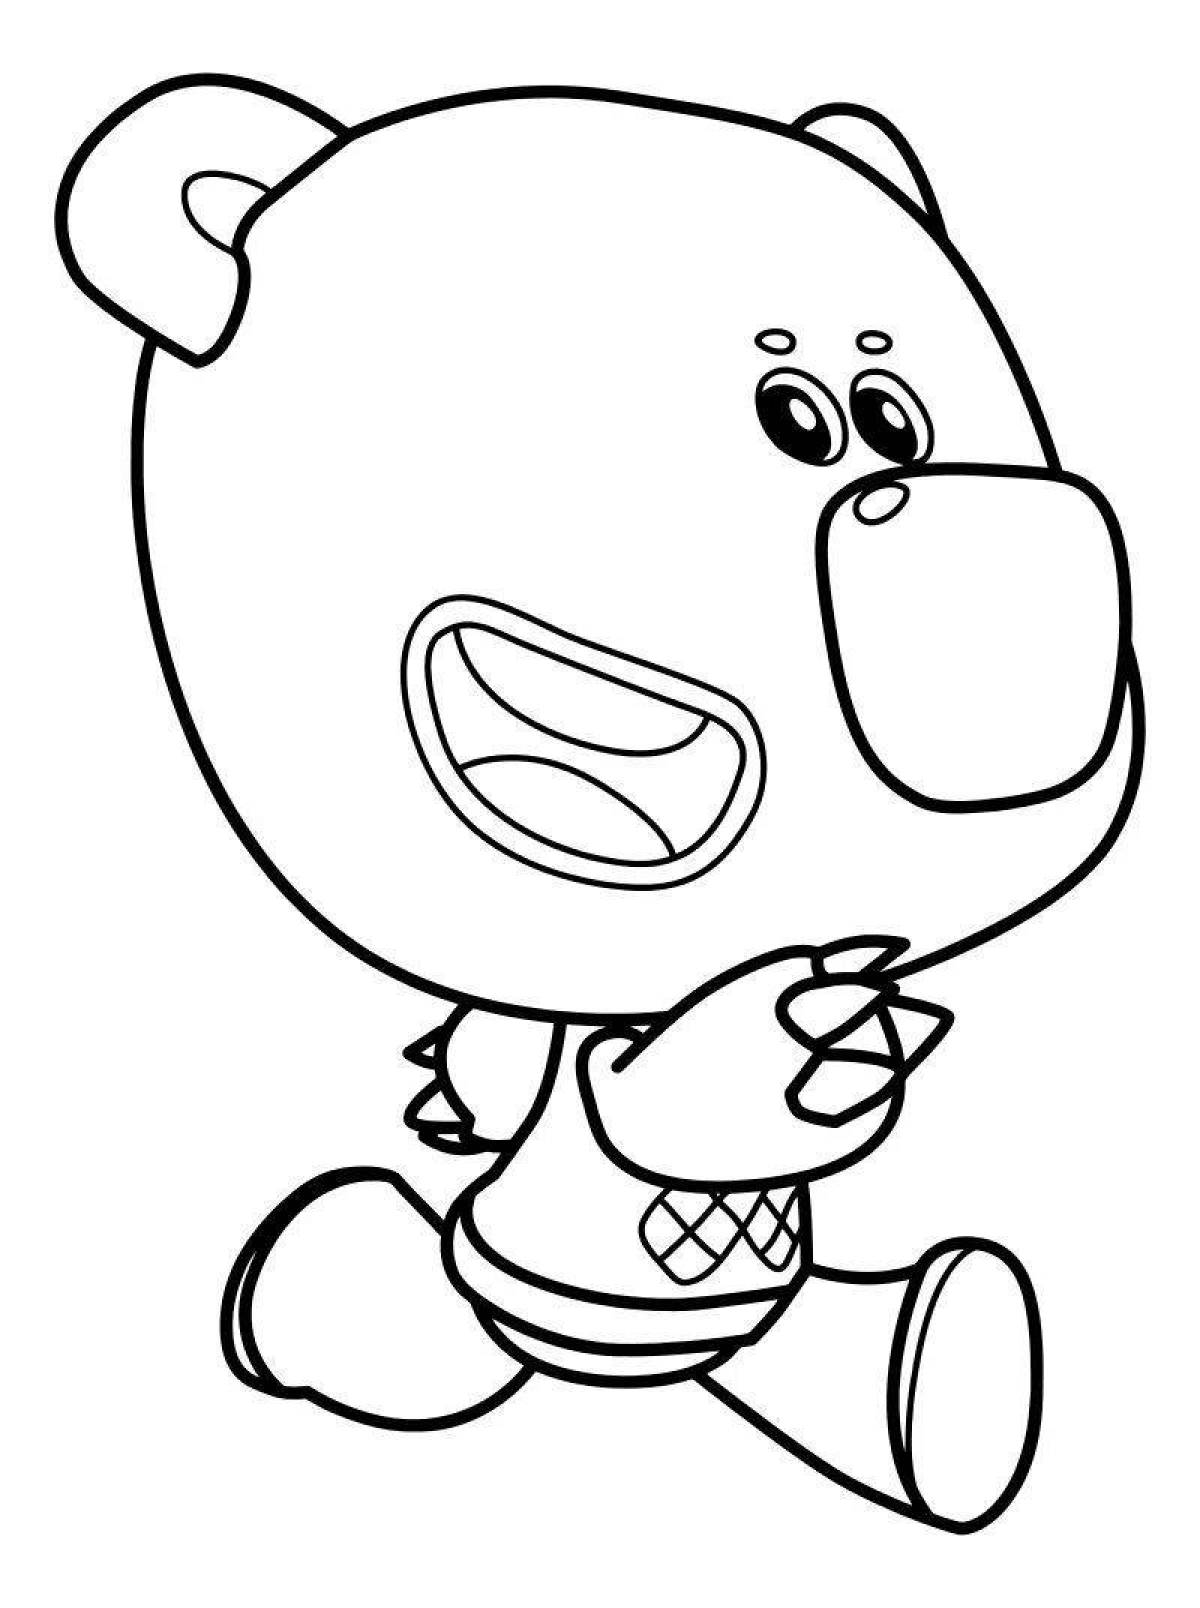 Amazing cartoons coloring pages